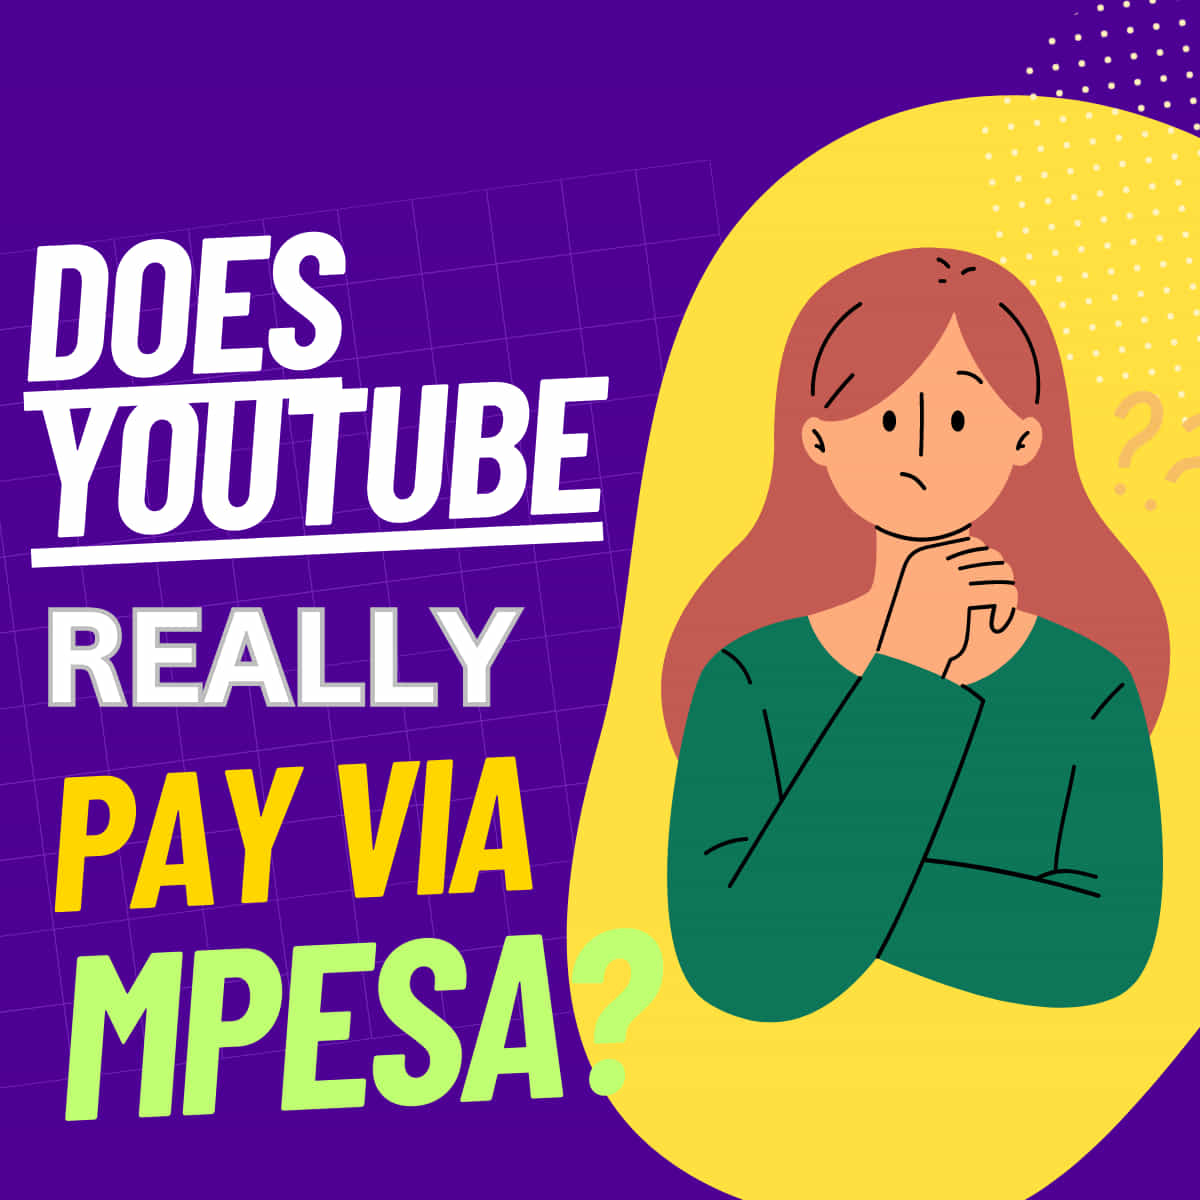 Does Youtube pay through Mpesa